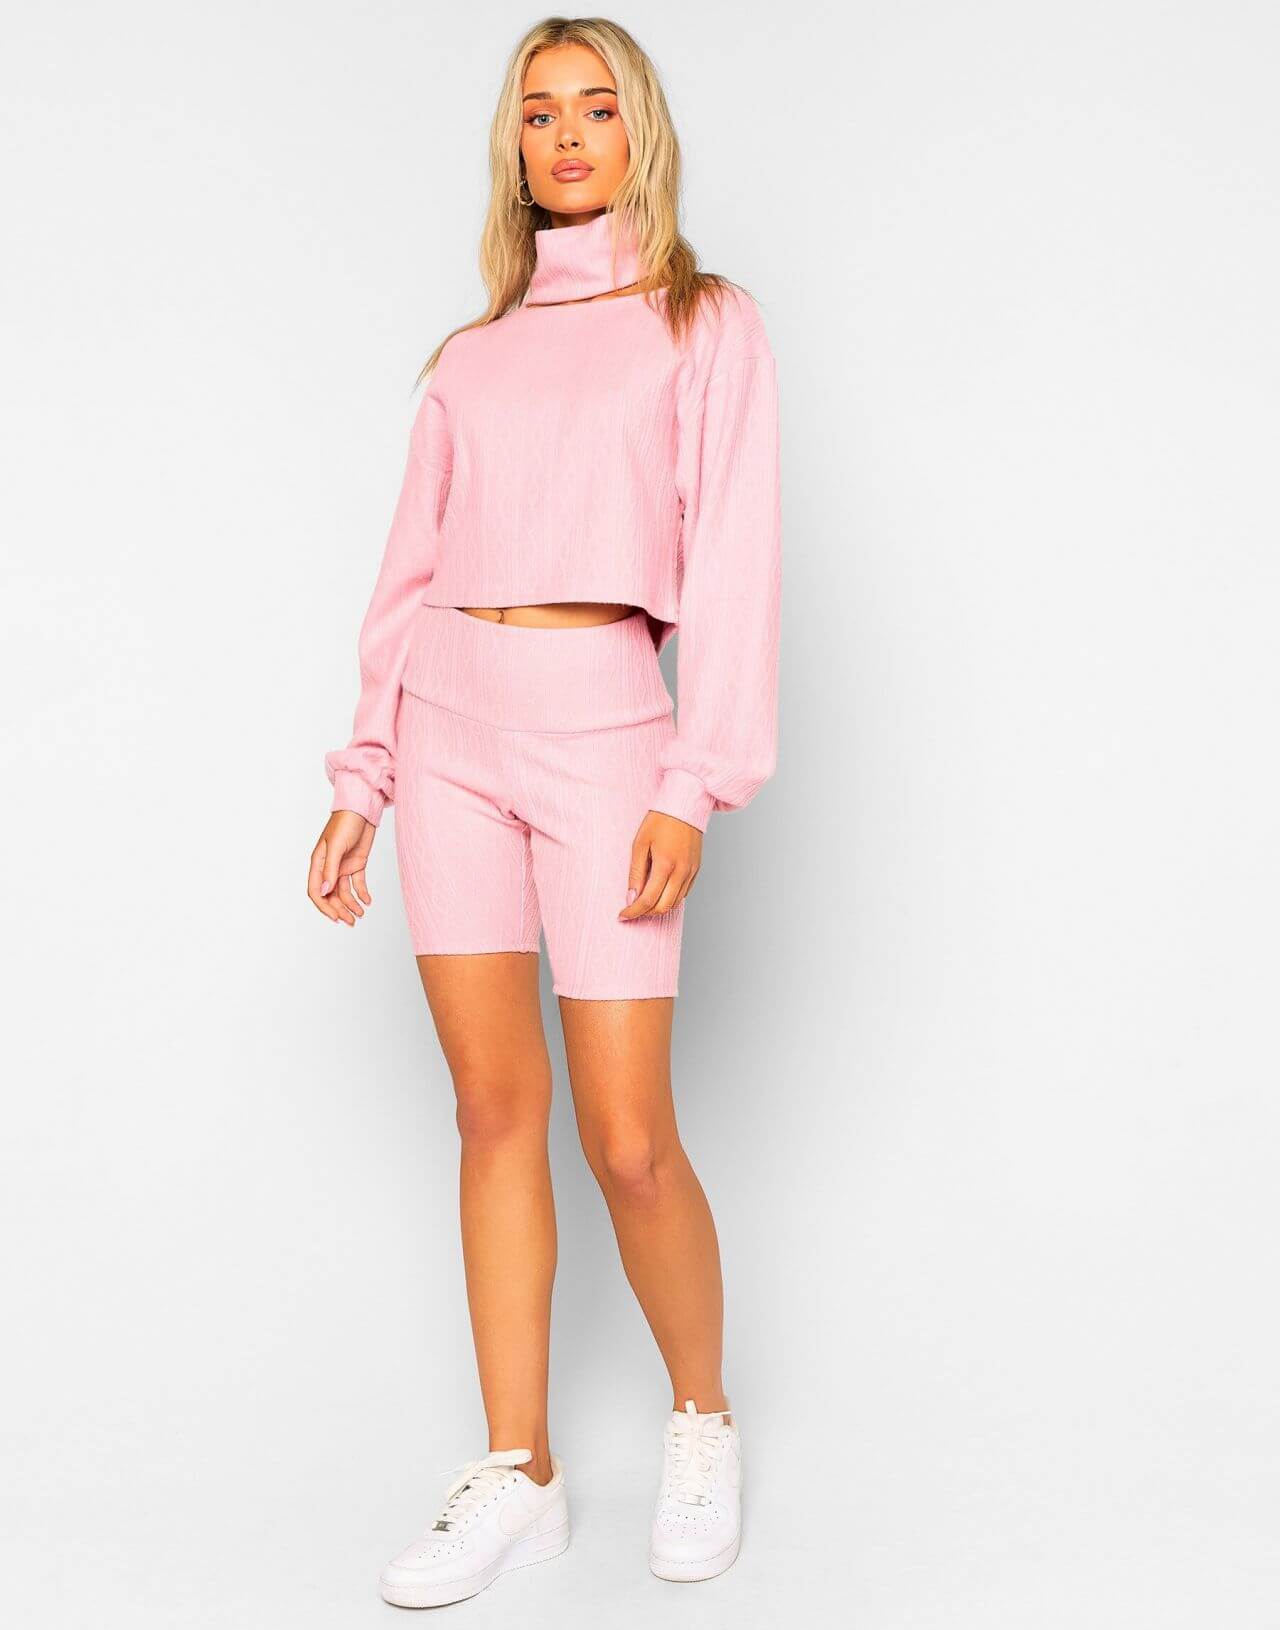 Carolina Marie Good Looks In Pink Co-Ord Set With White Shoes